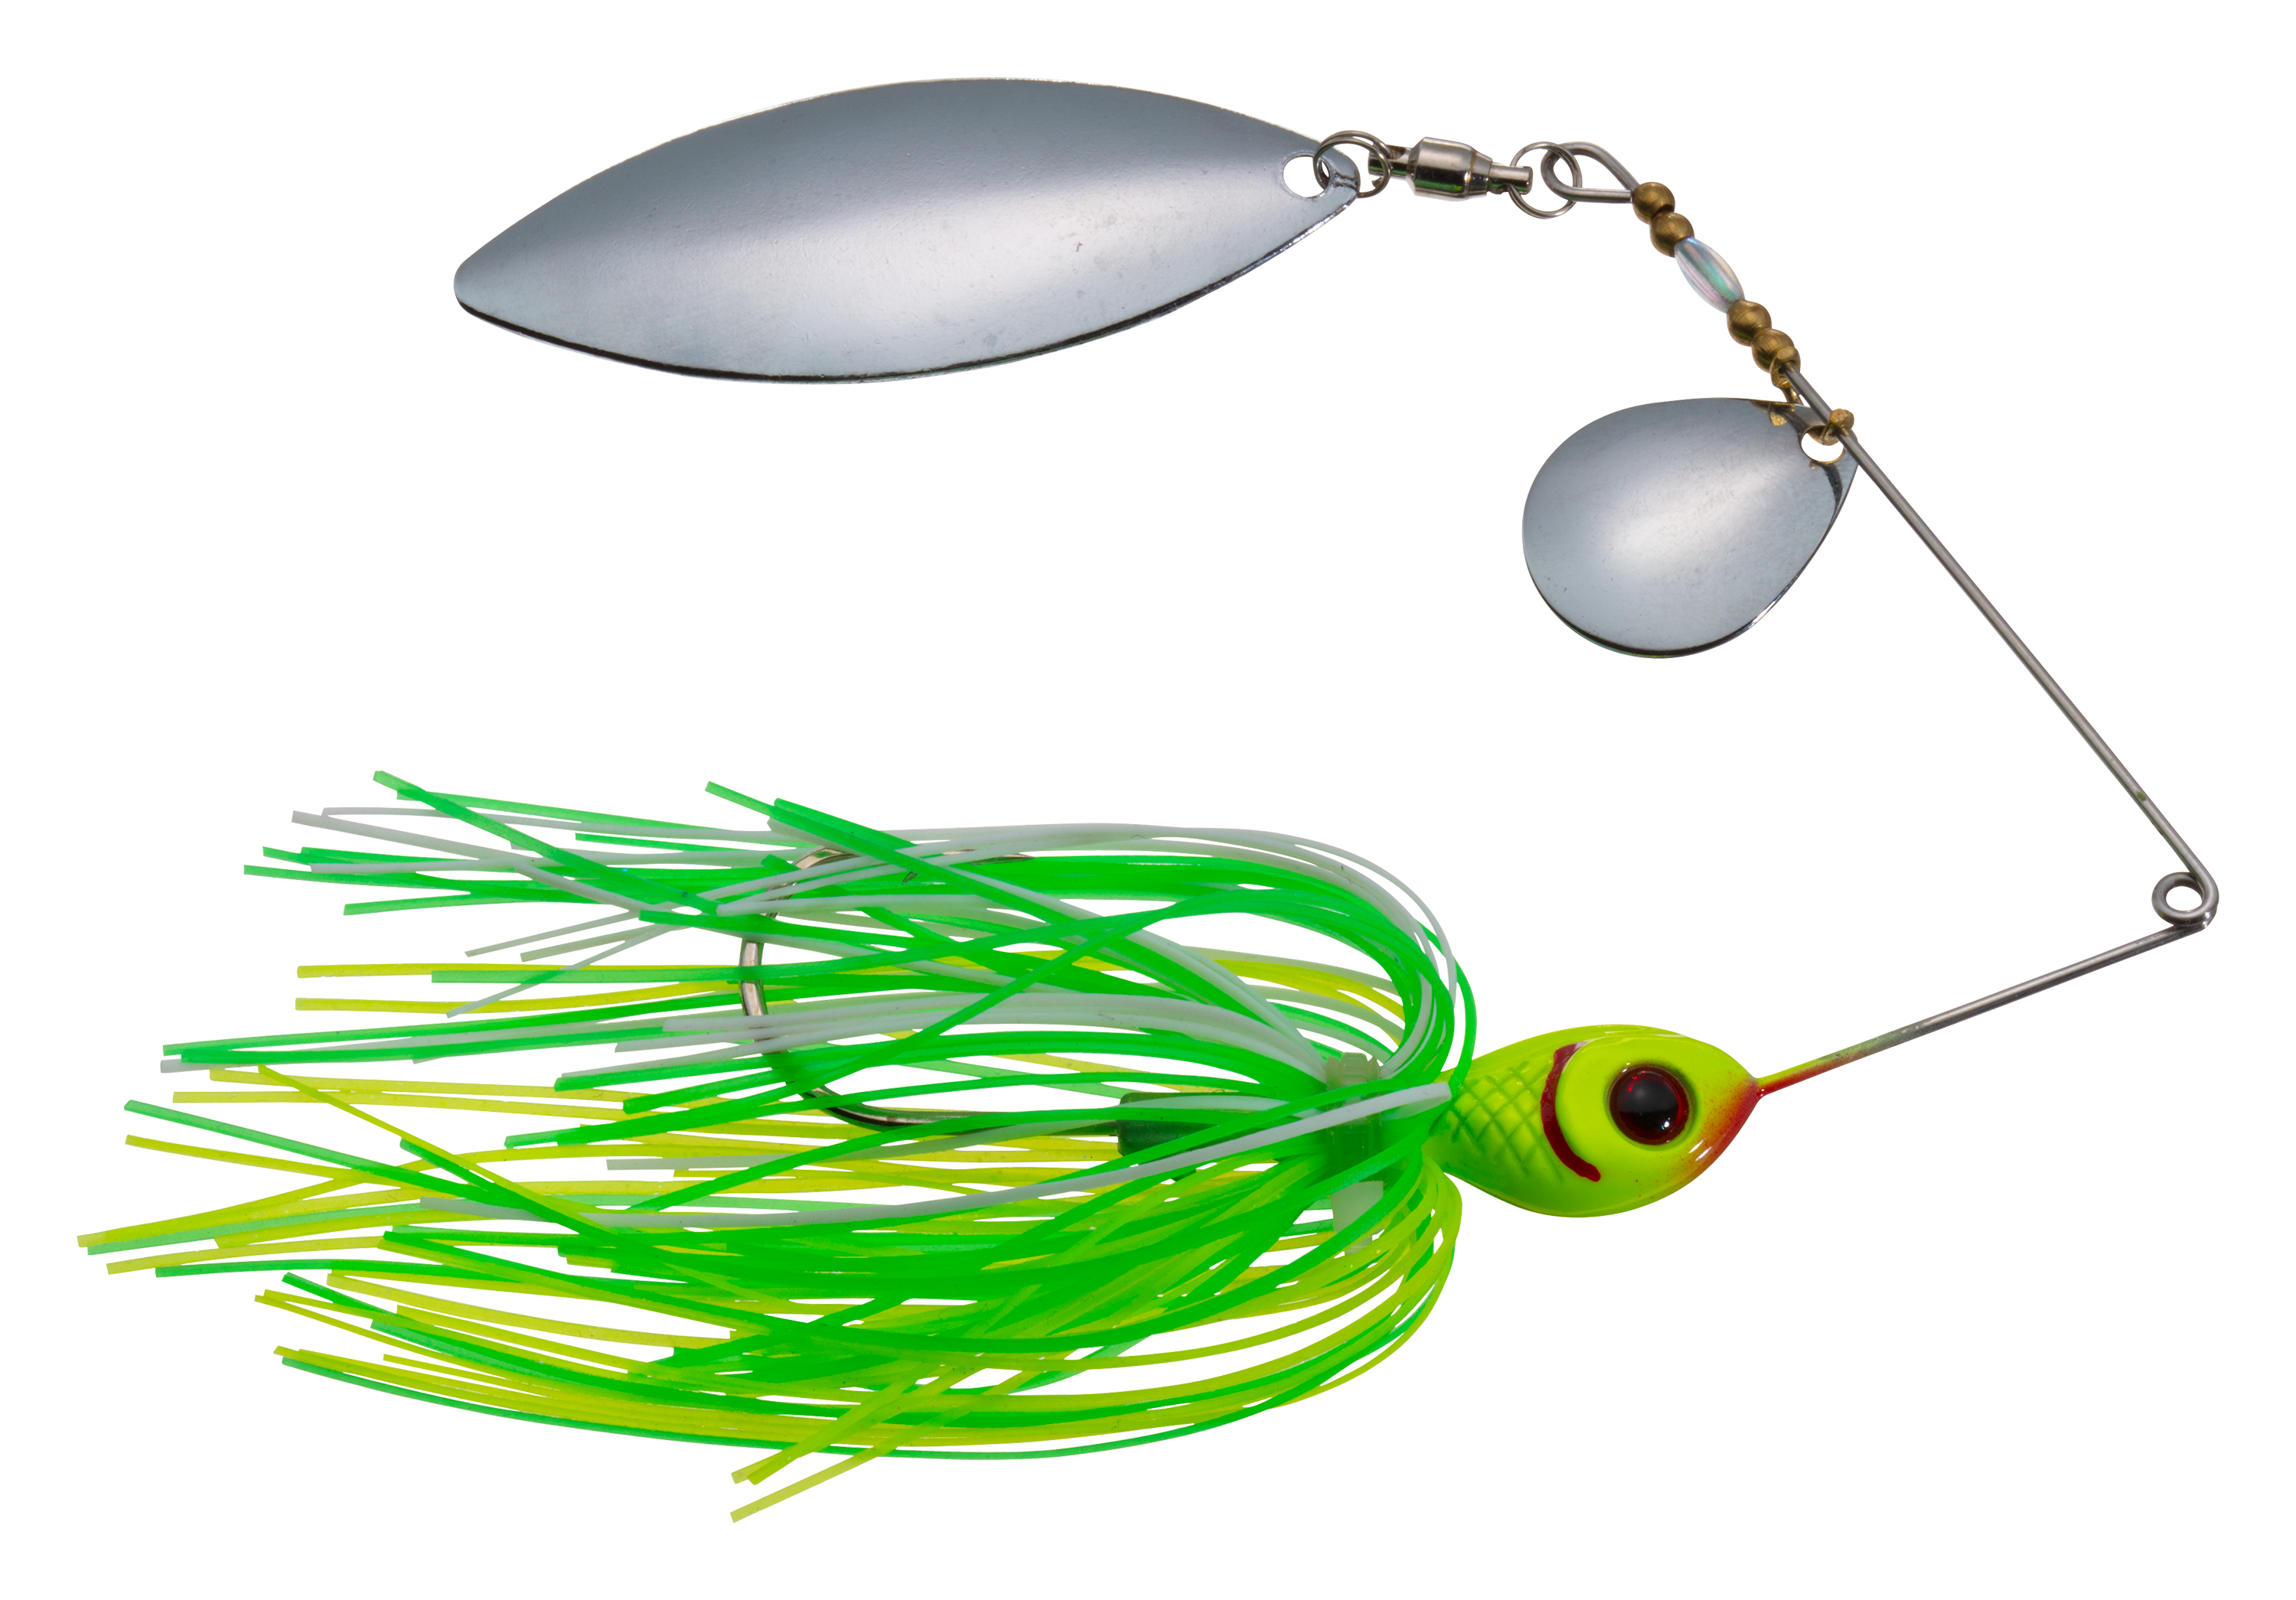 Bass Pro Shops Muskie Angler Closed-Loop Spinnerbait - Green/Chartreuse